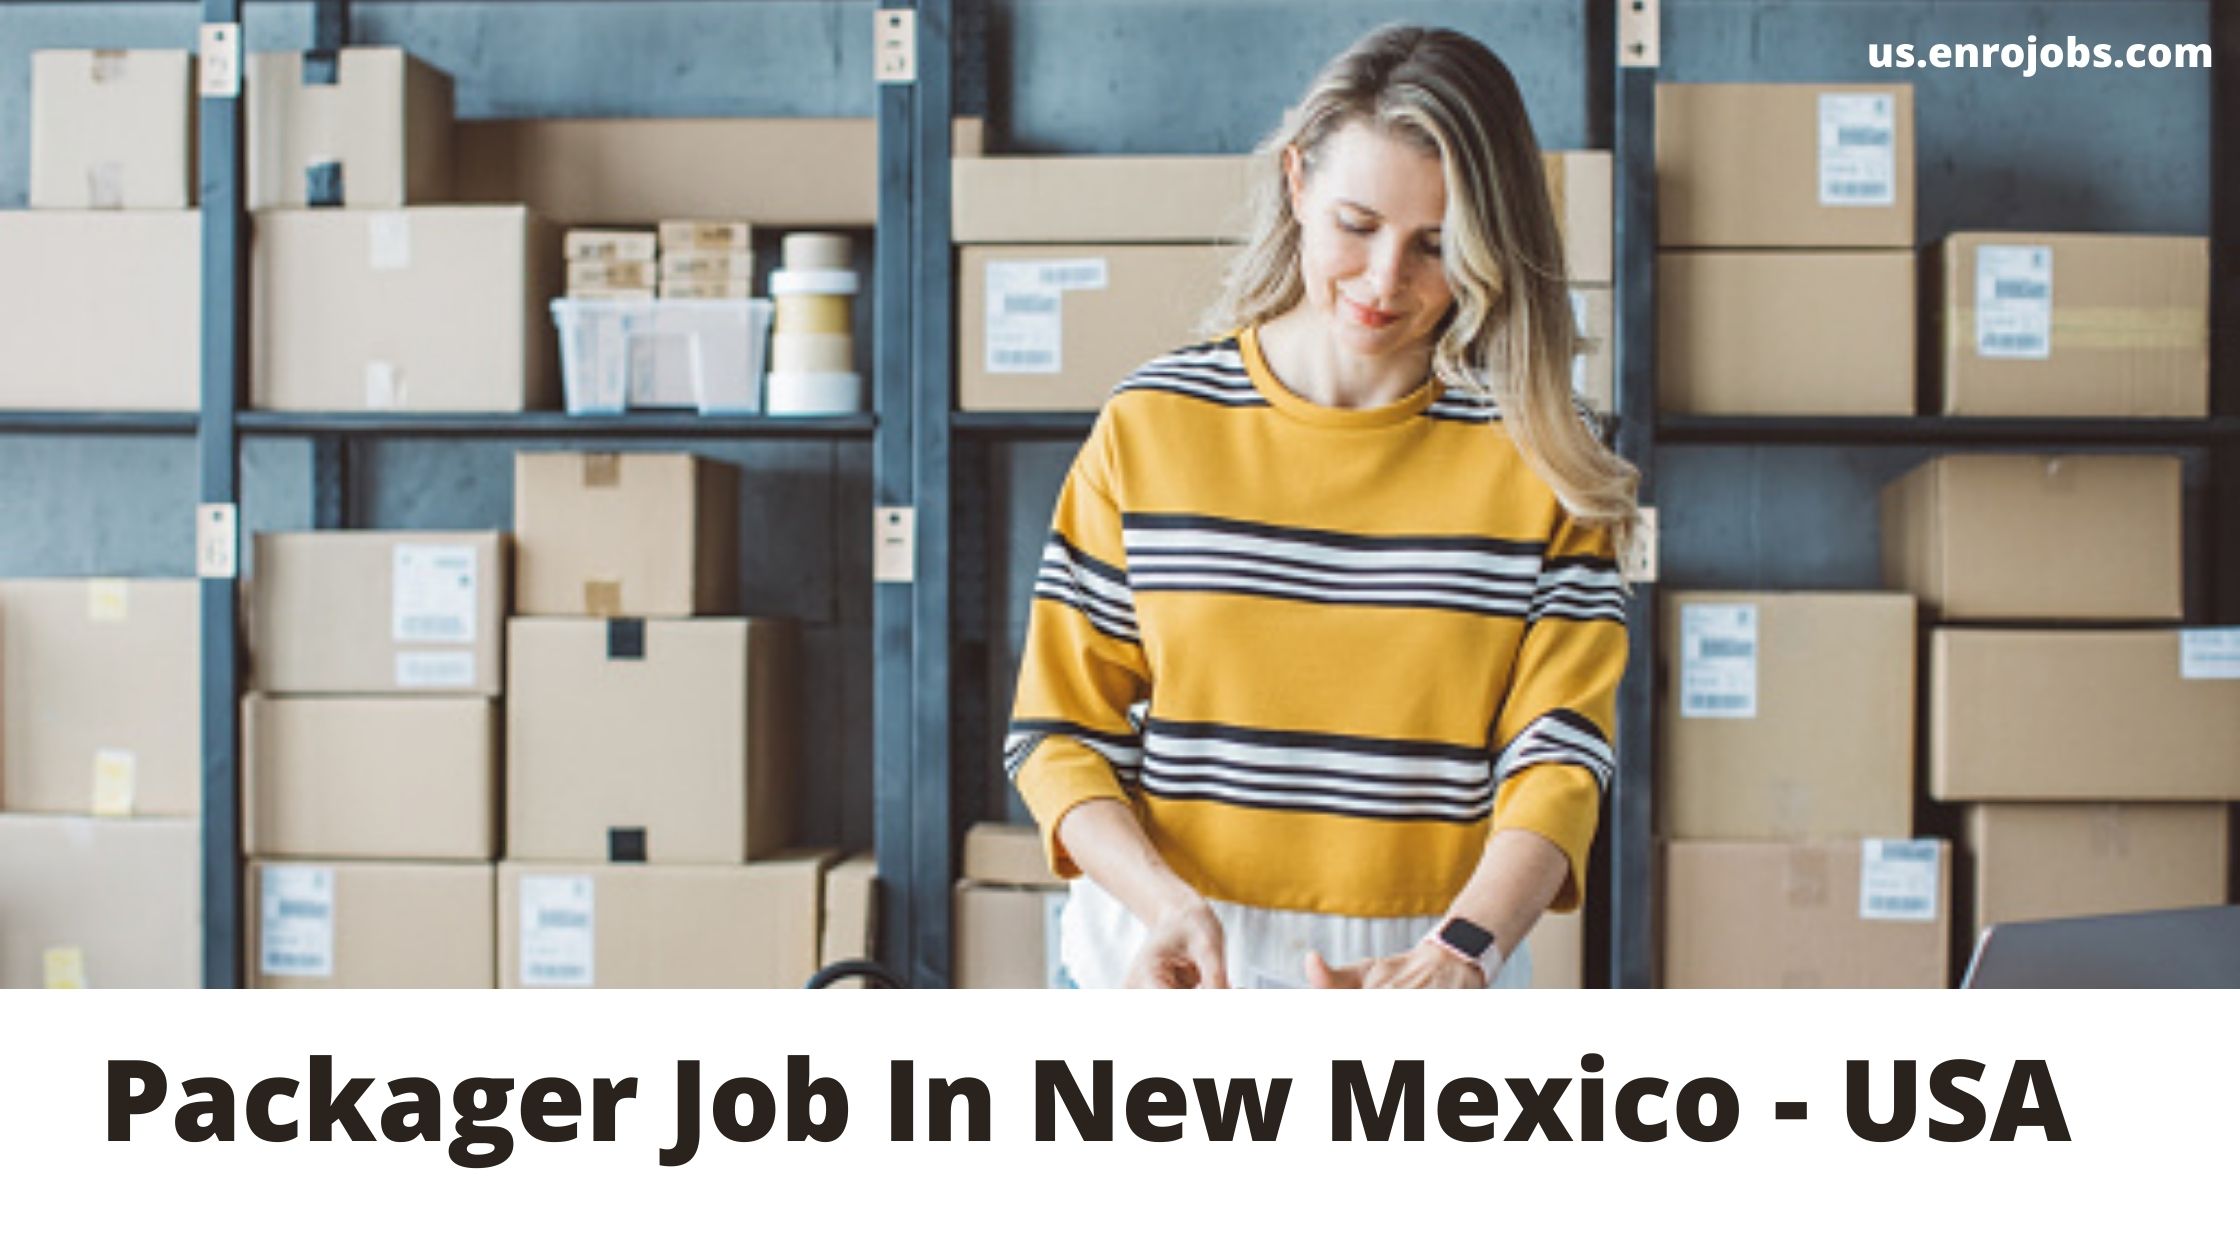 Packager Job In New Mexico - USA